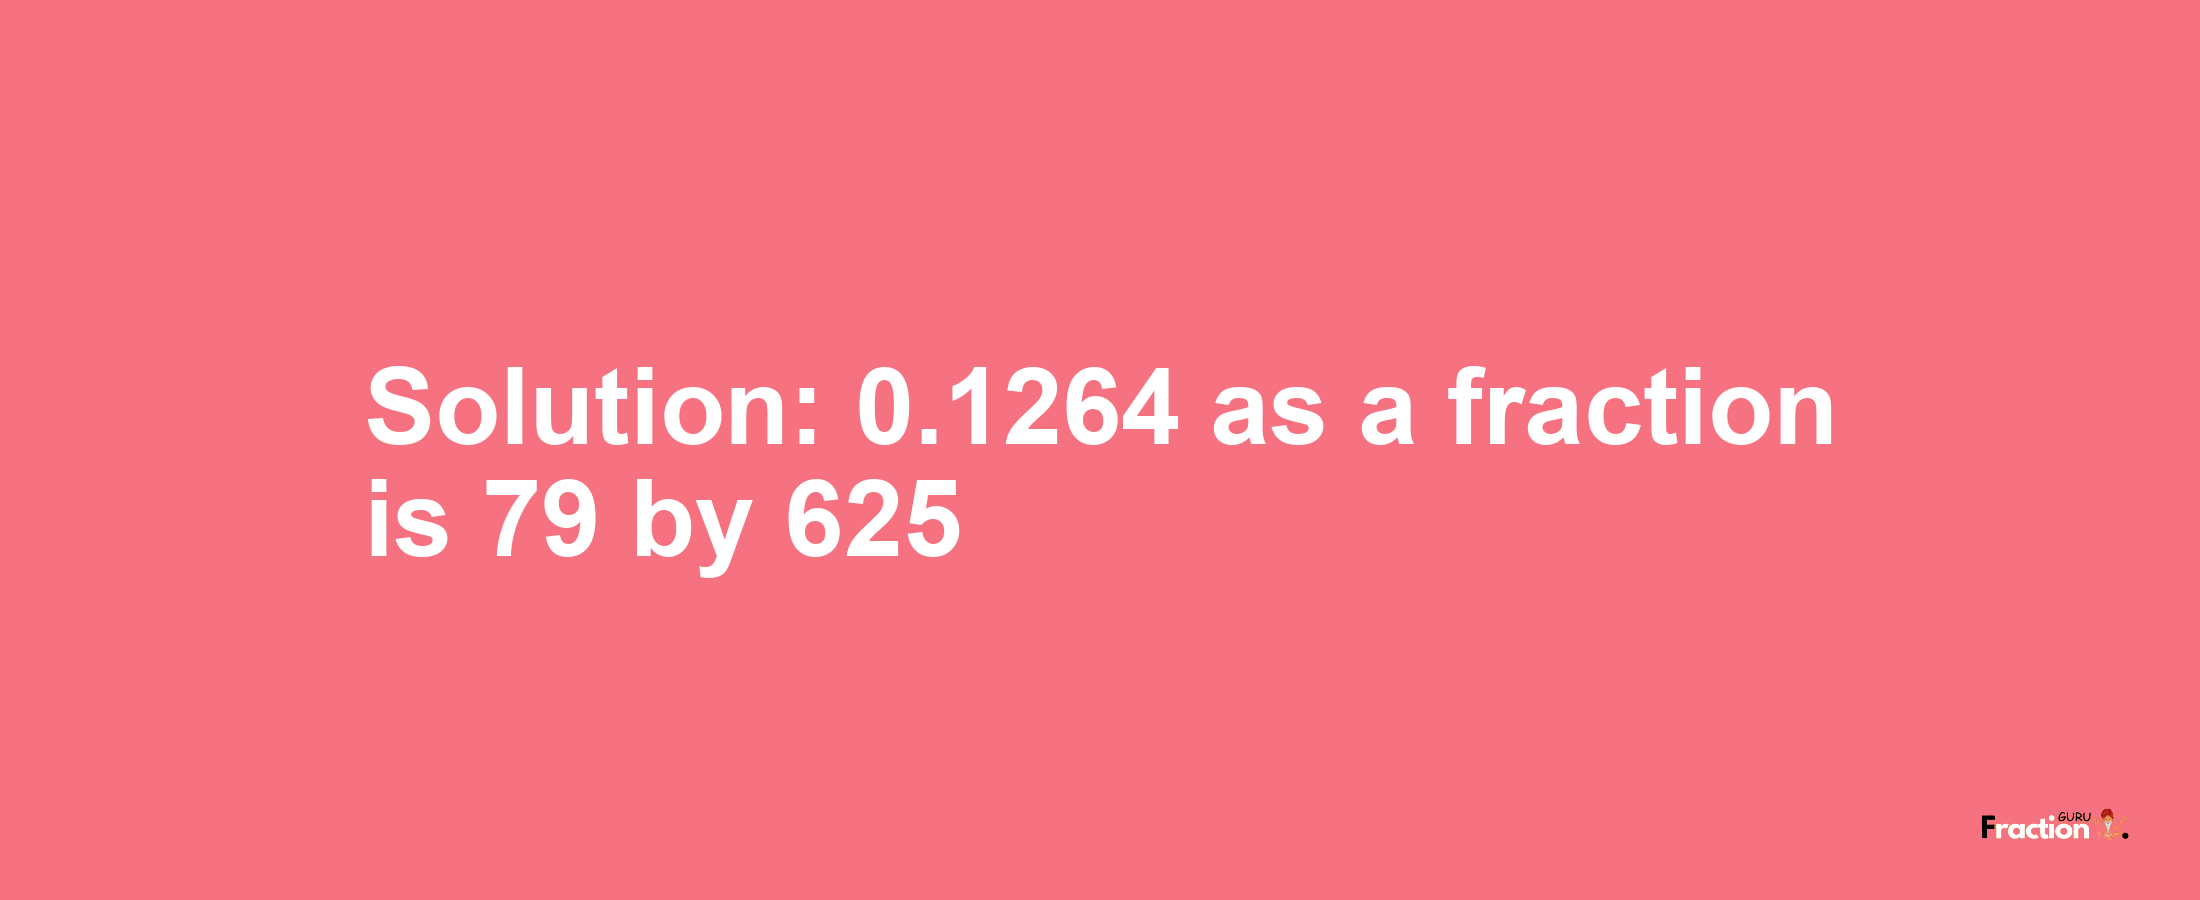 Solution:0.1264 as a fraction is 79/625